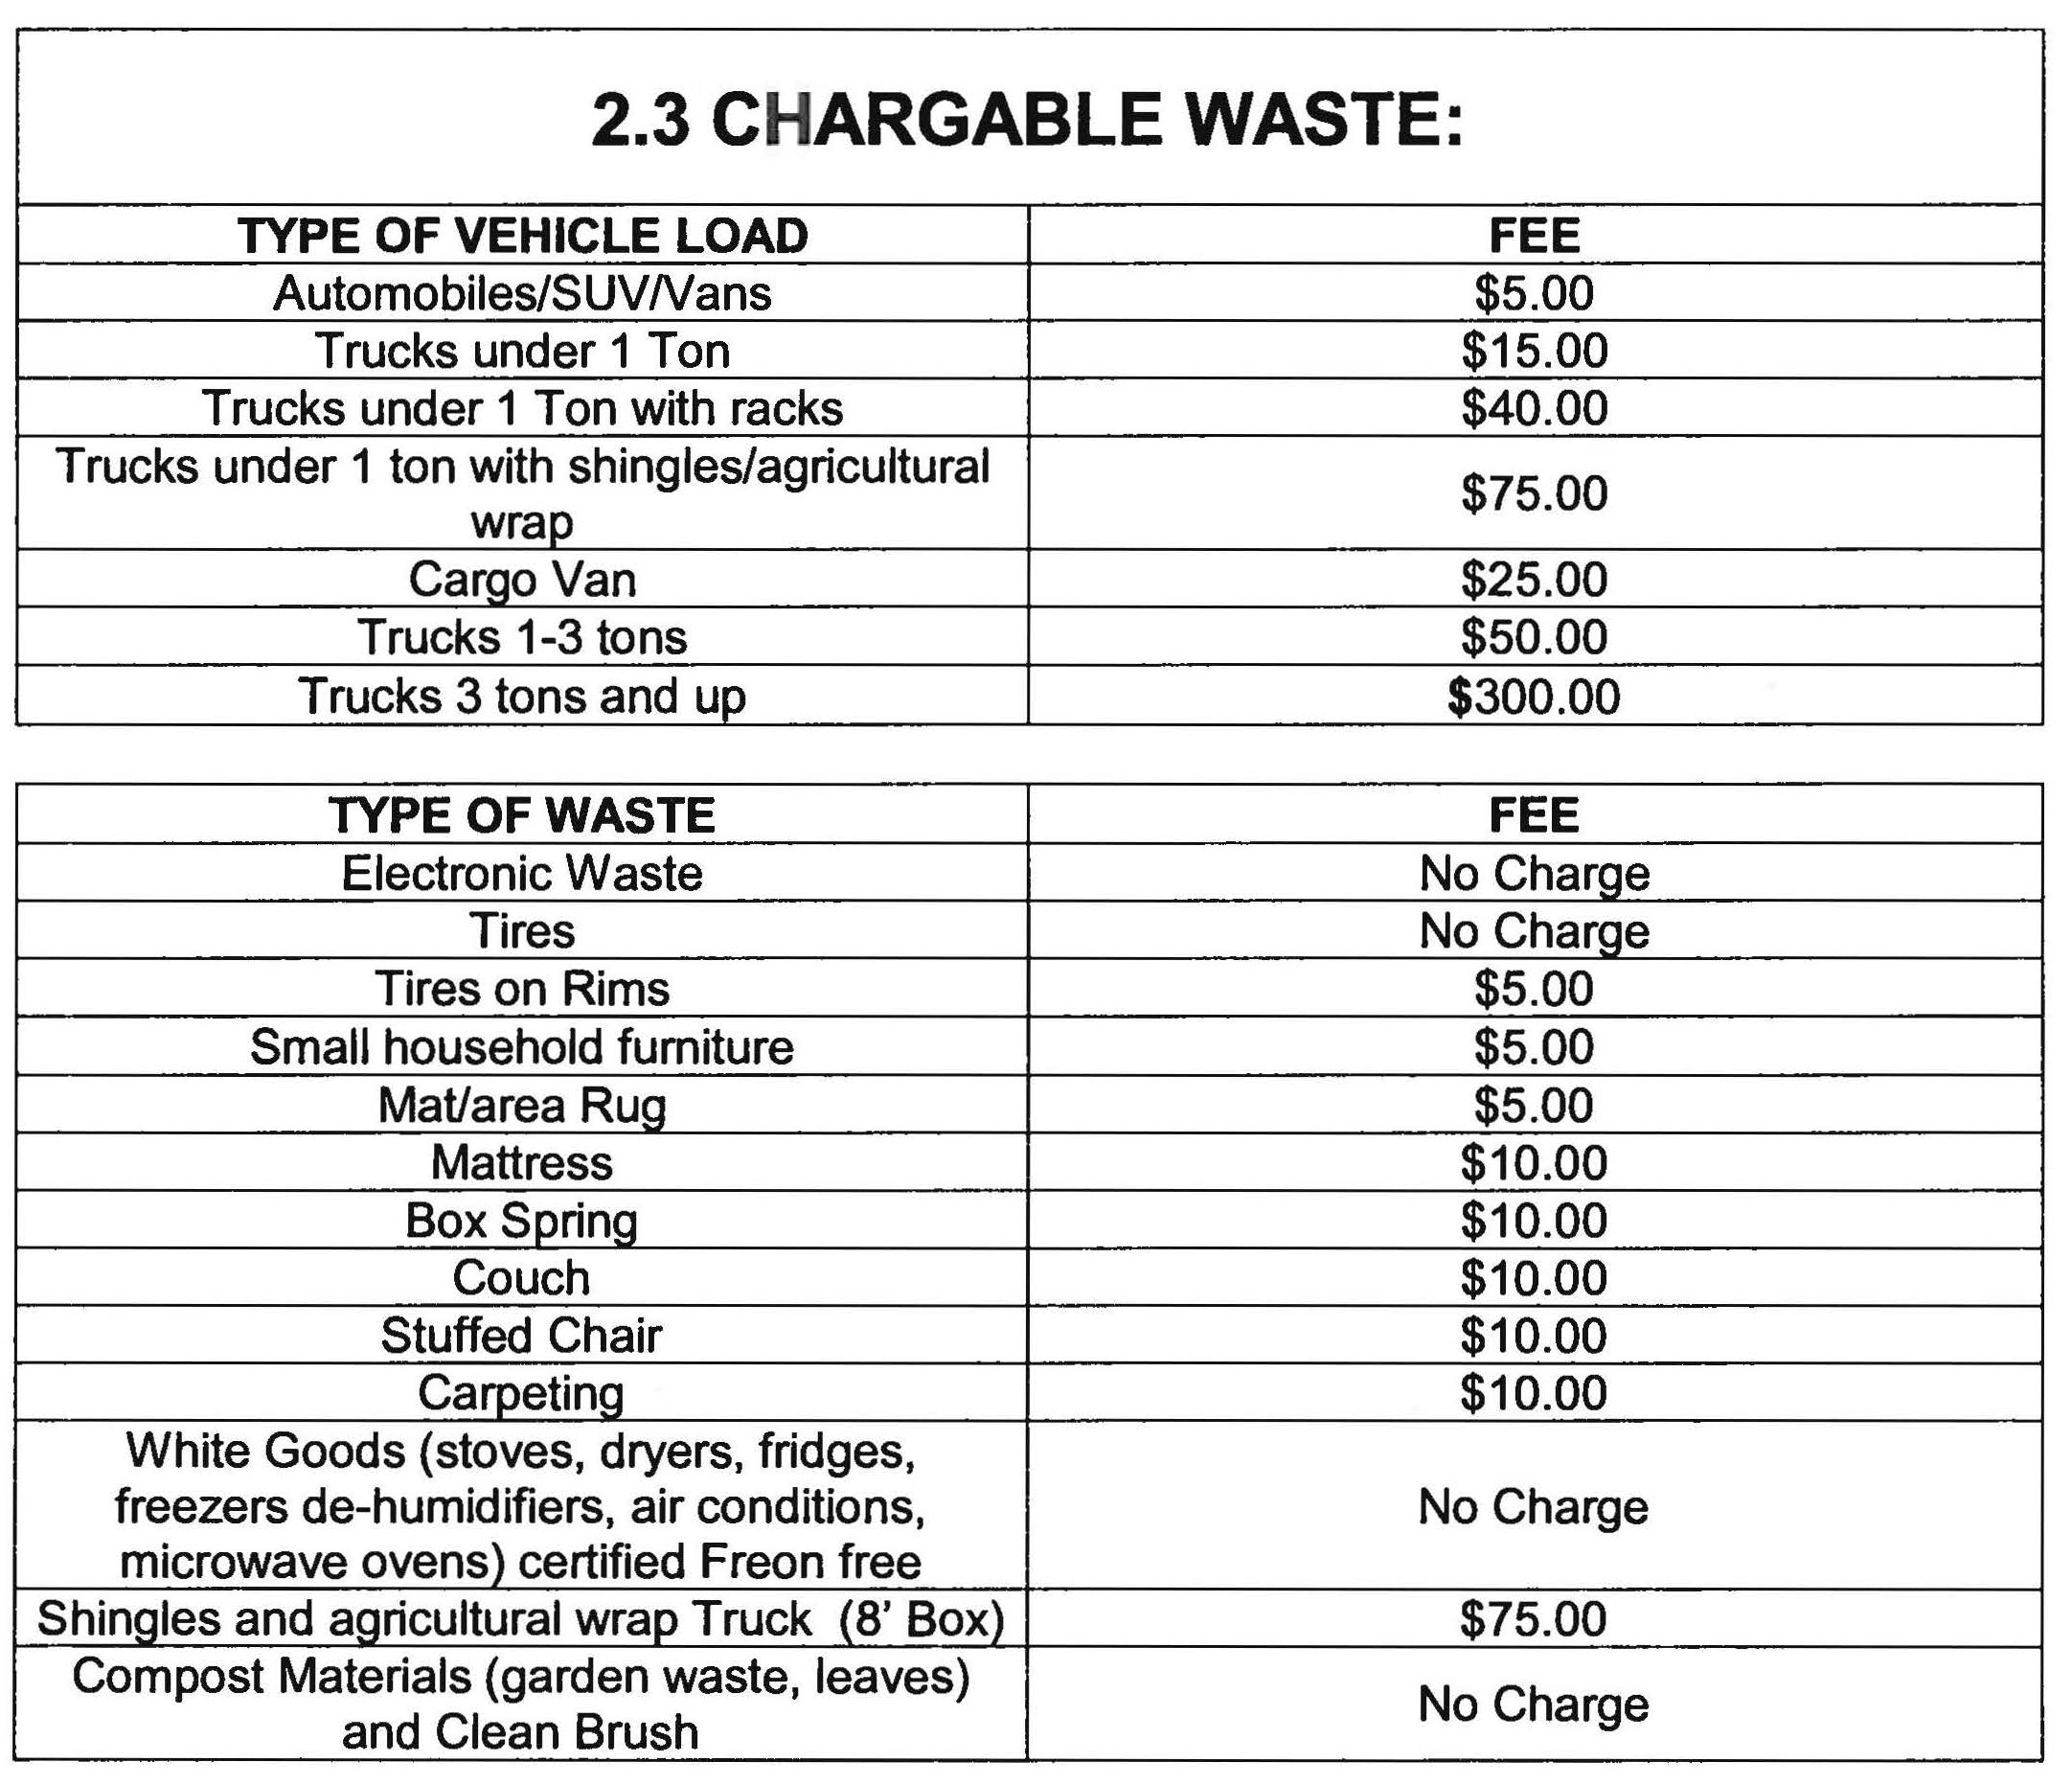 2.3 Chargeable Waste Chart